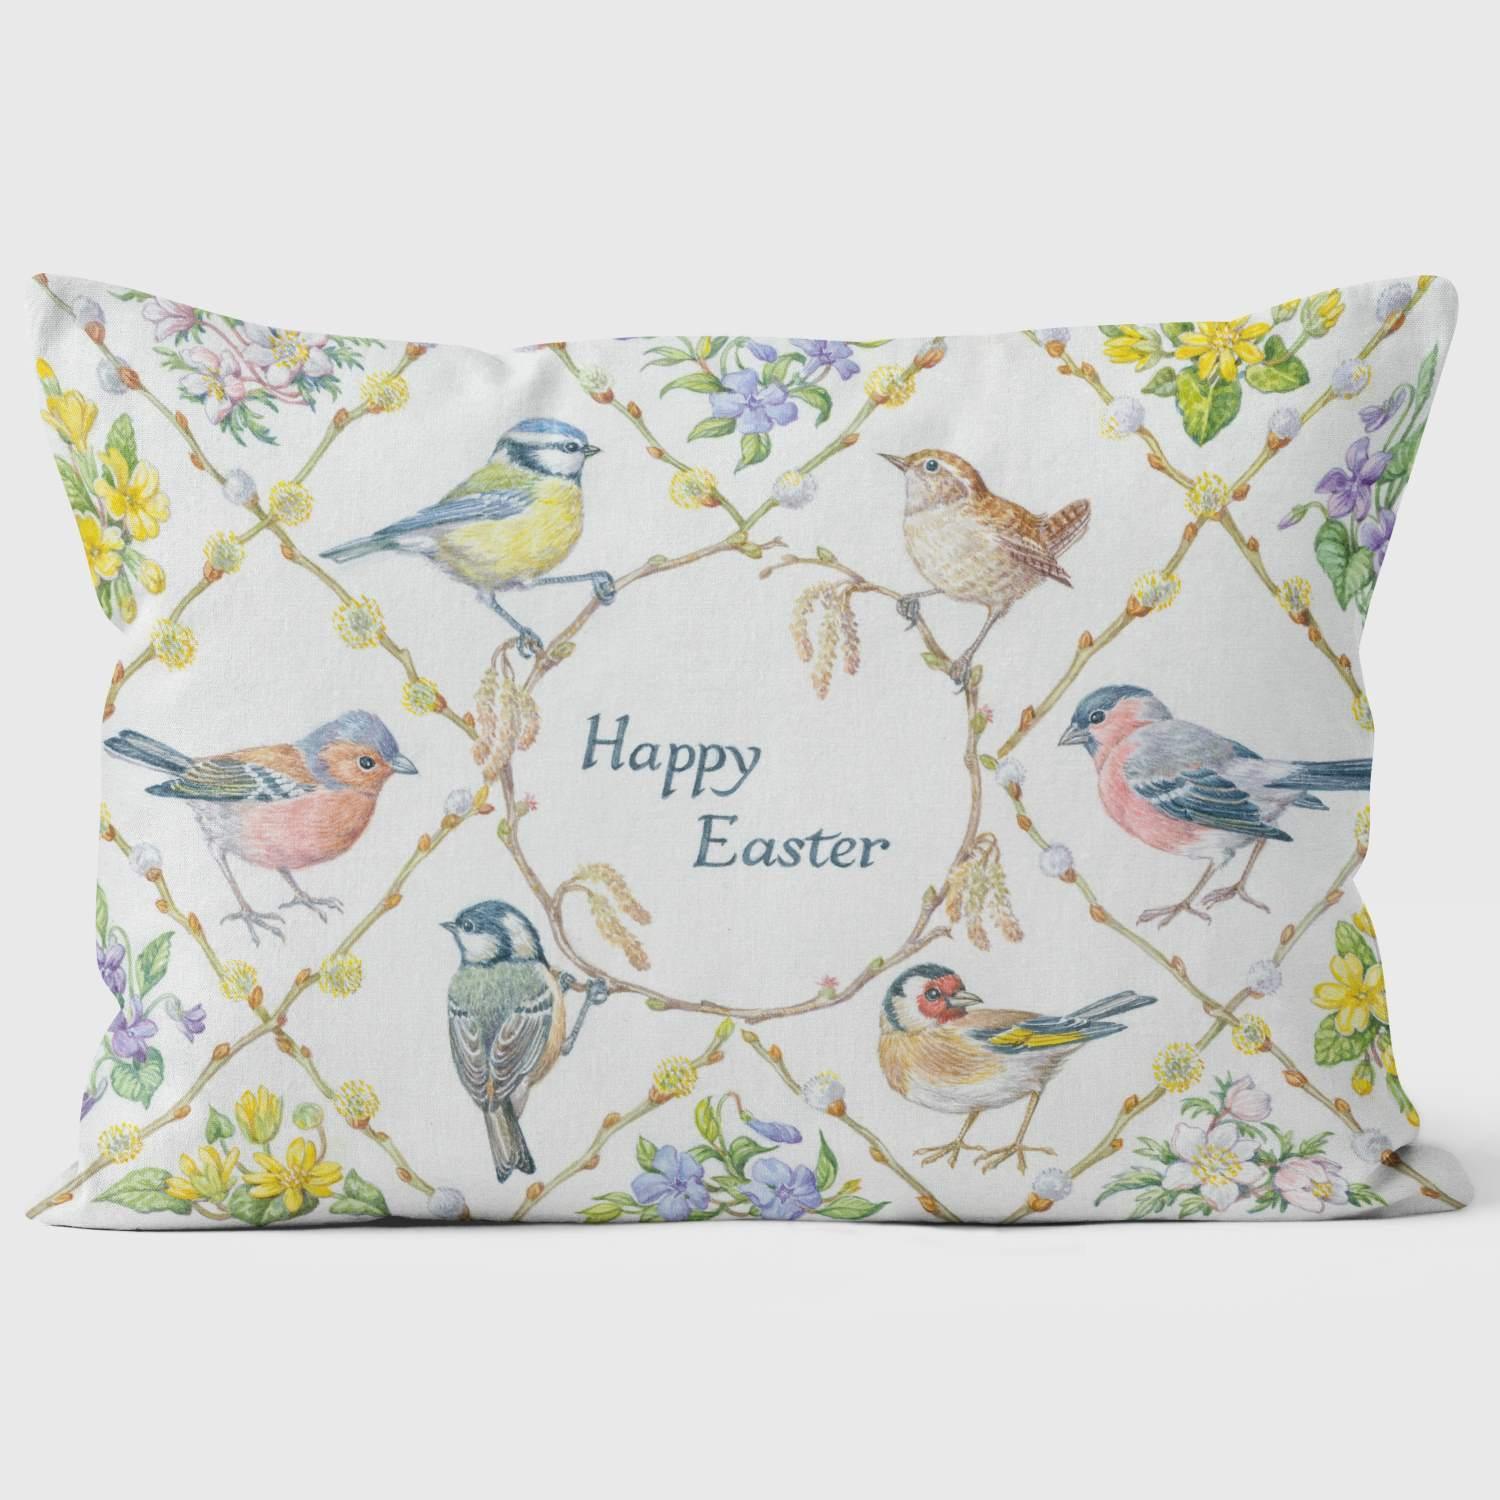 Happy Easter - Special Occasions Cushion - Handmade Cushions UK - WeLoveCushions